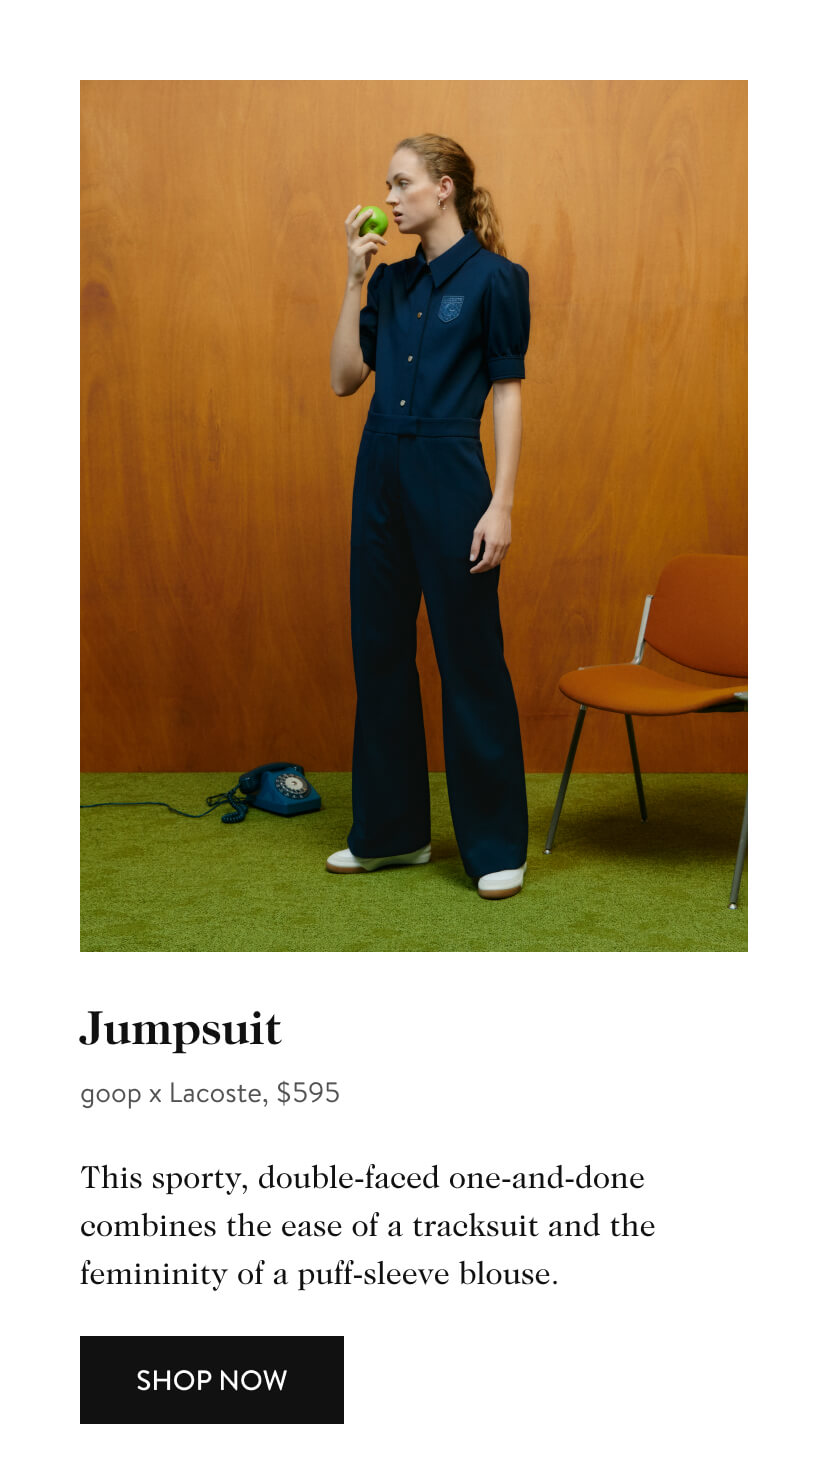  Jumpsuit goop x Lacoste, $595 This sporty, double-faced one-and-done combines the ease of a tracksuit and the femininity of a puff-sleeve blouse. SHOP NOW 